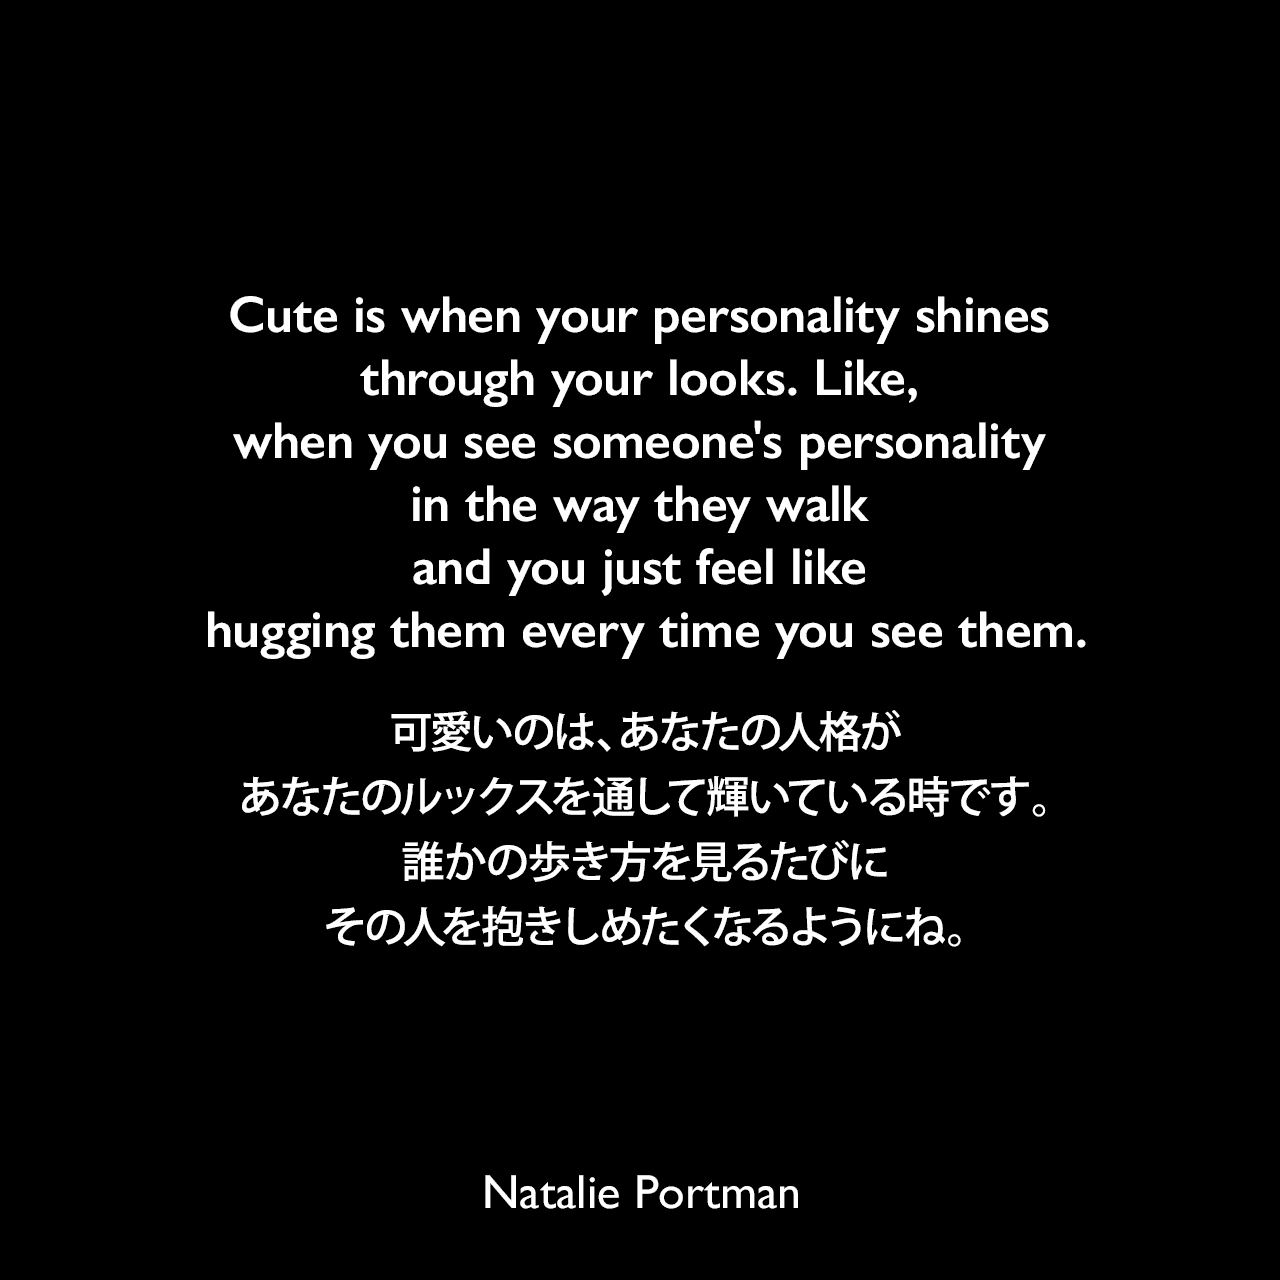 Cute is when your personality shines through your looks. Like, when you see someone's personality in the way they walk and you just feel like hugging them every time you see them.可愛いのは、あなたの人格があなたのルックスを通して輝いている時です。誰かの歩き方を見るたびにその人を抱きしめたくなるようにね。Natalie Portman